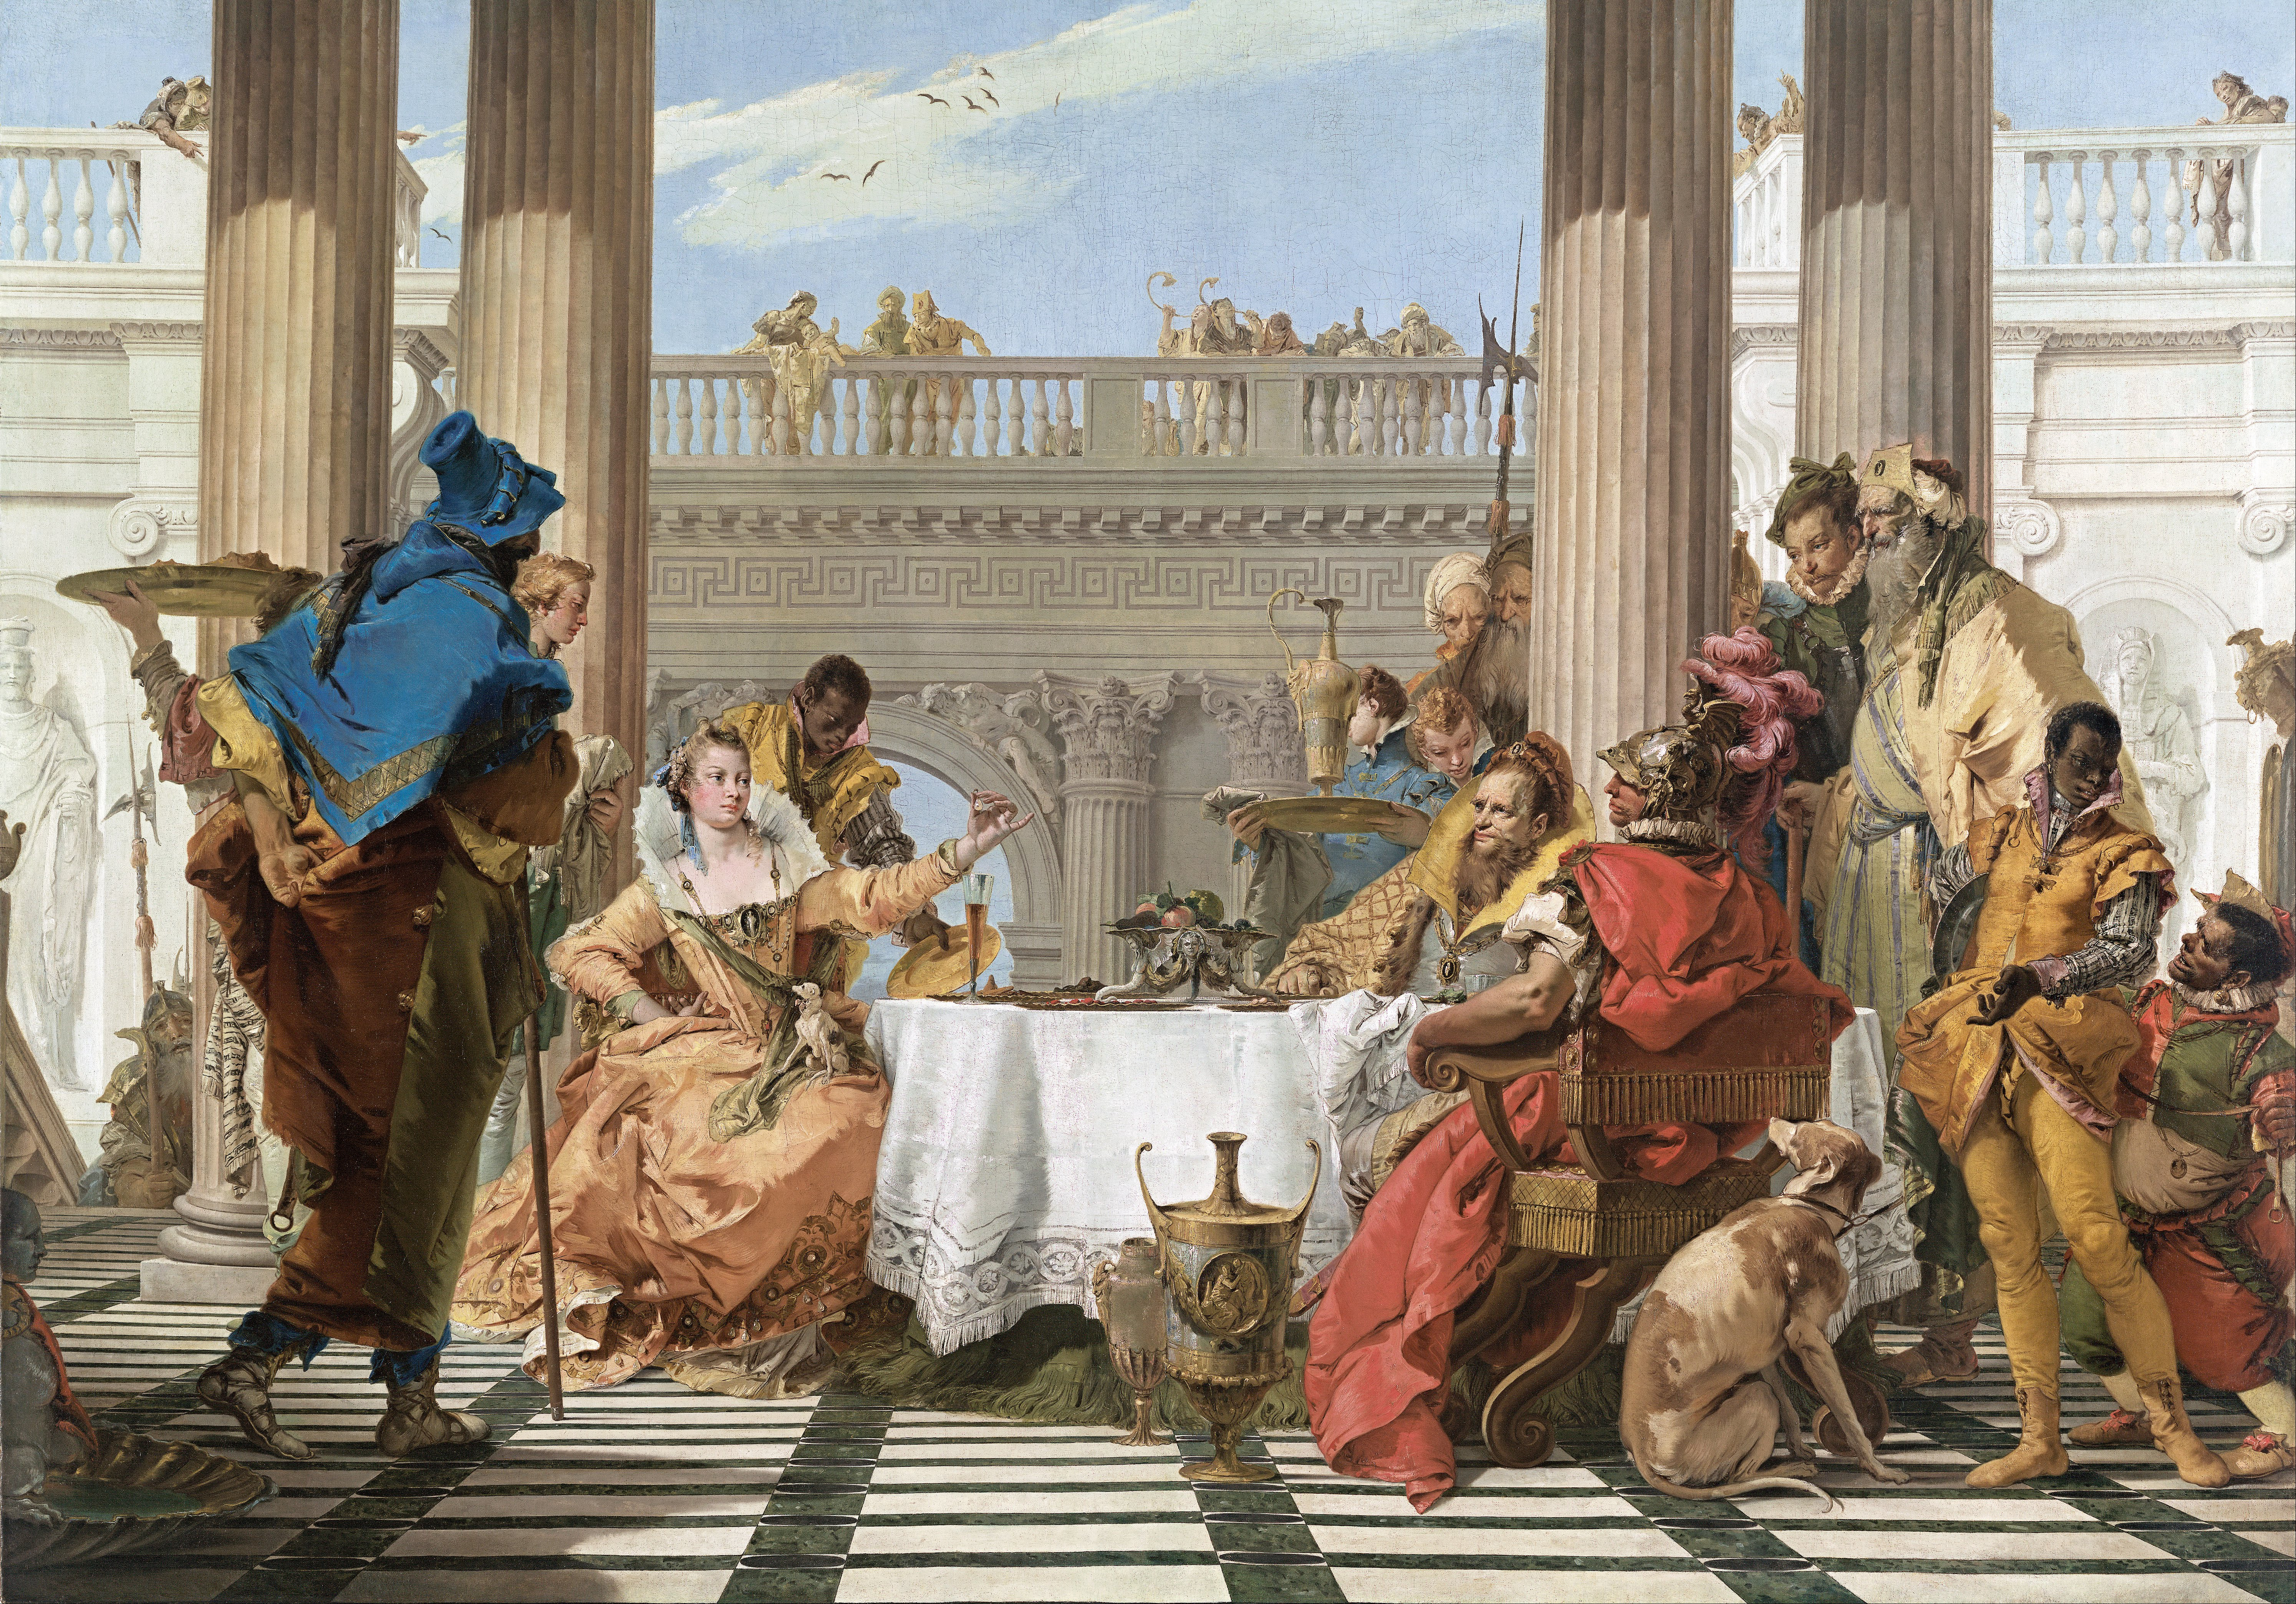 Painting of Ancient Roman outdoor banquet